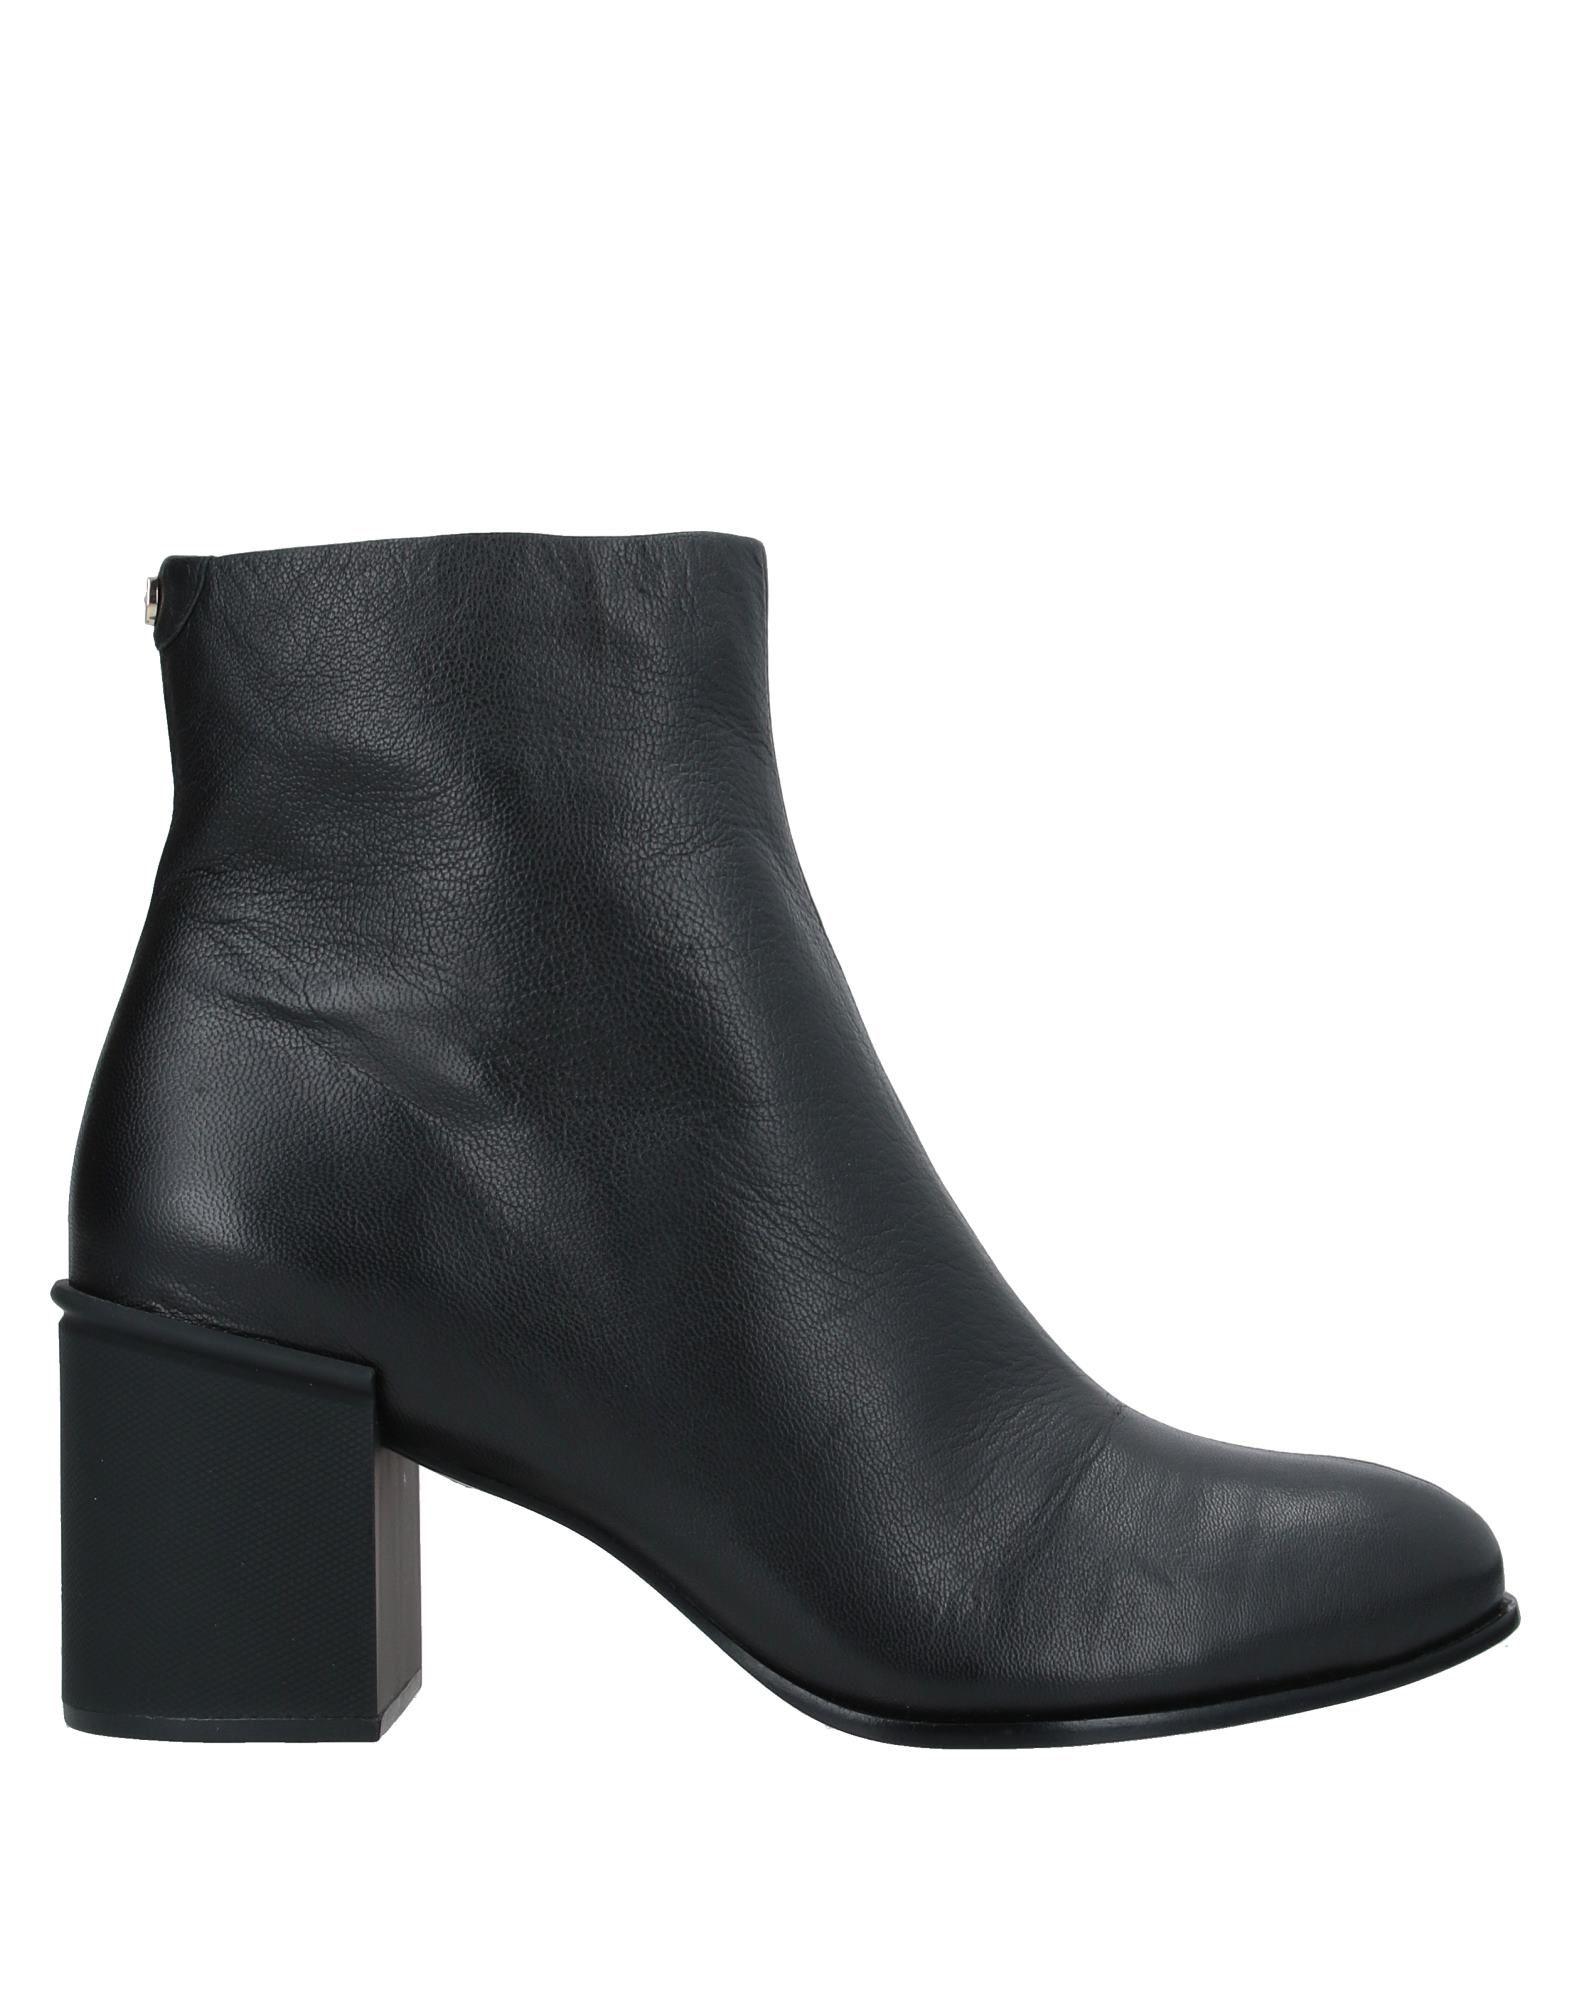 DKNY Leather Ankle Boots in Black - Lyst